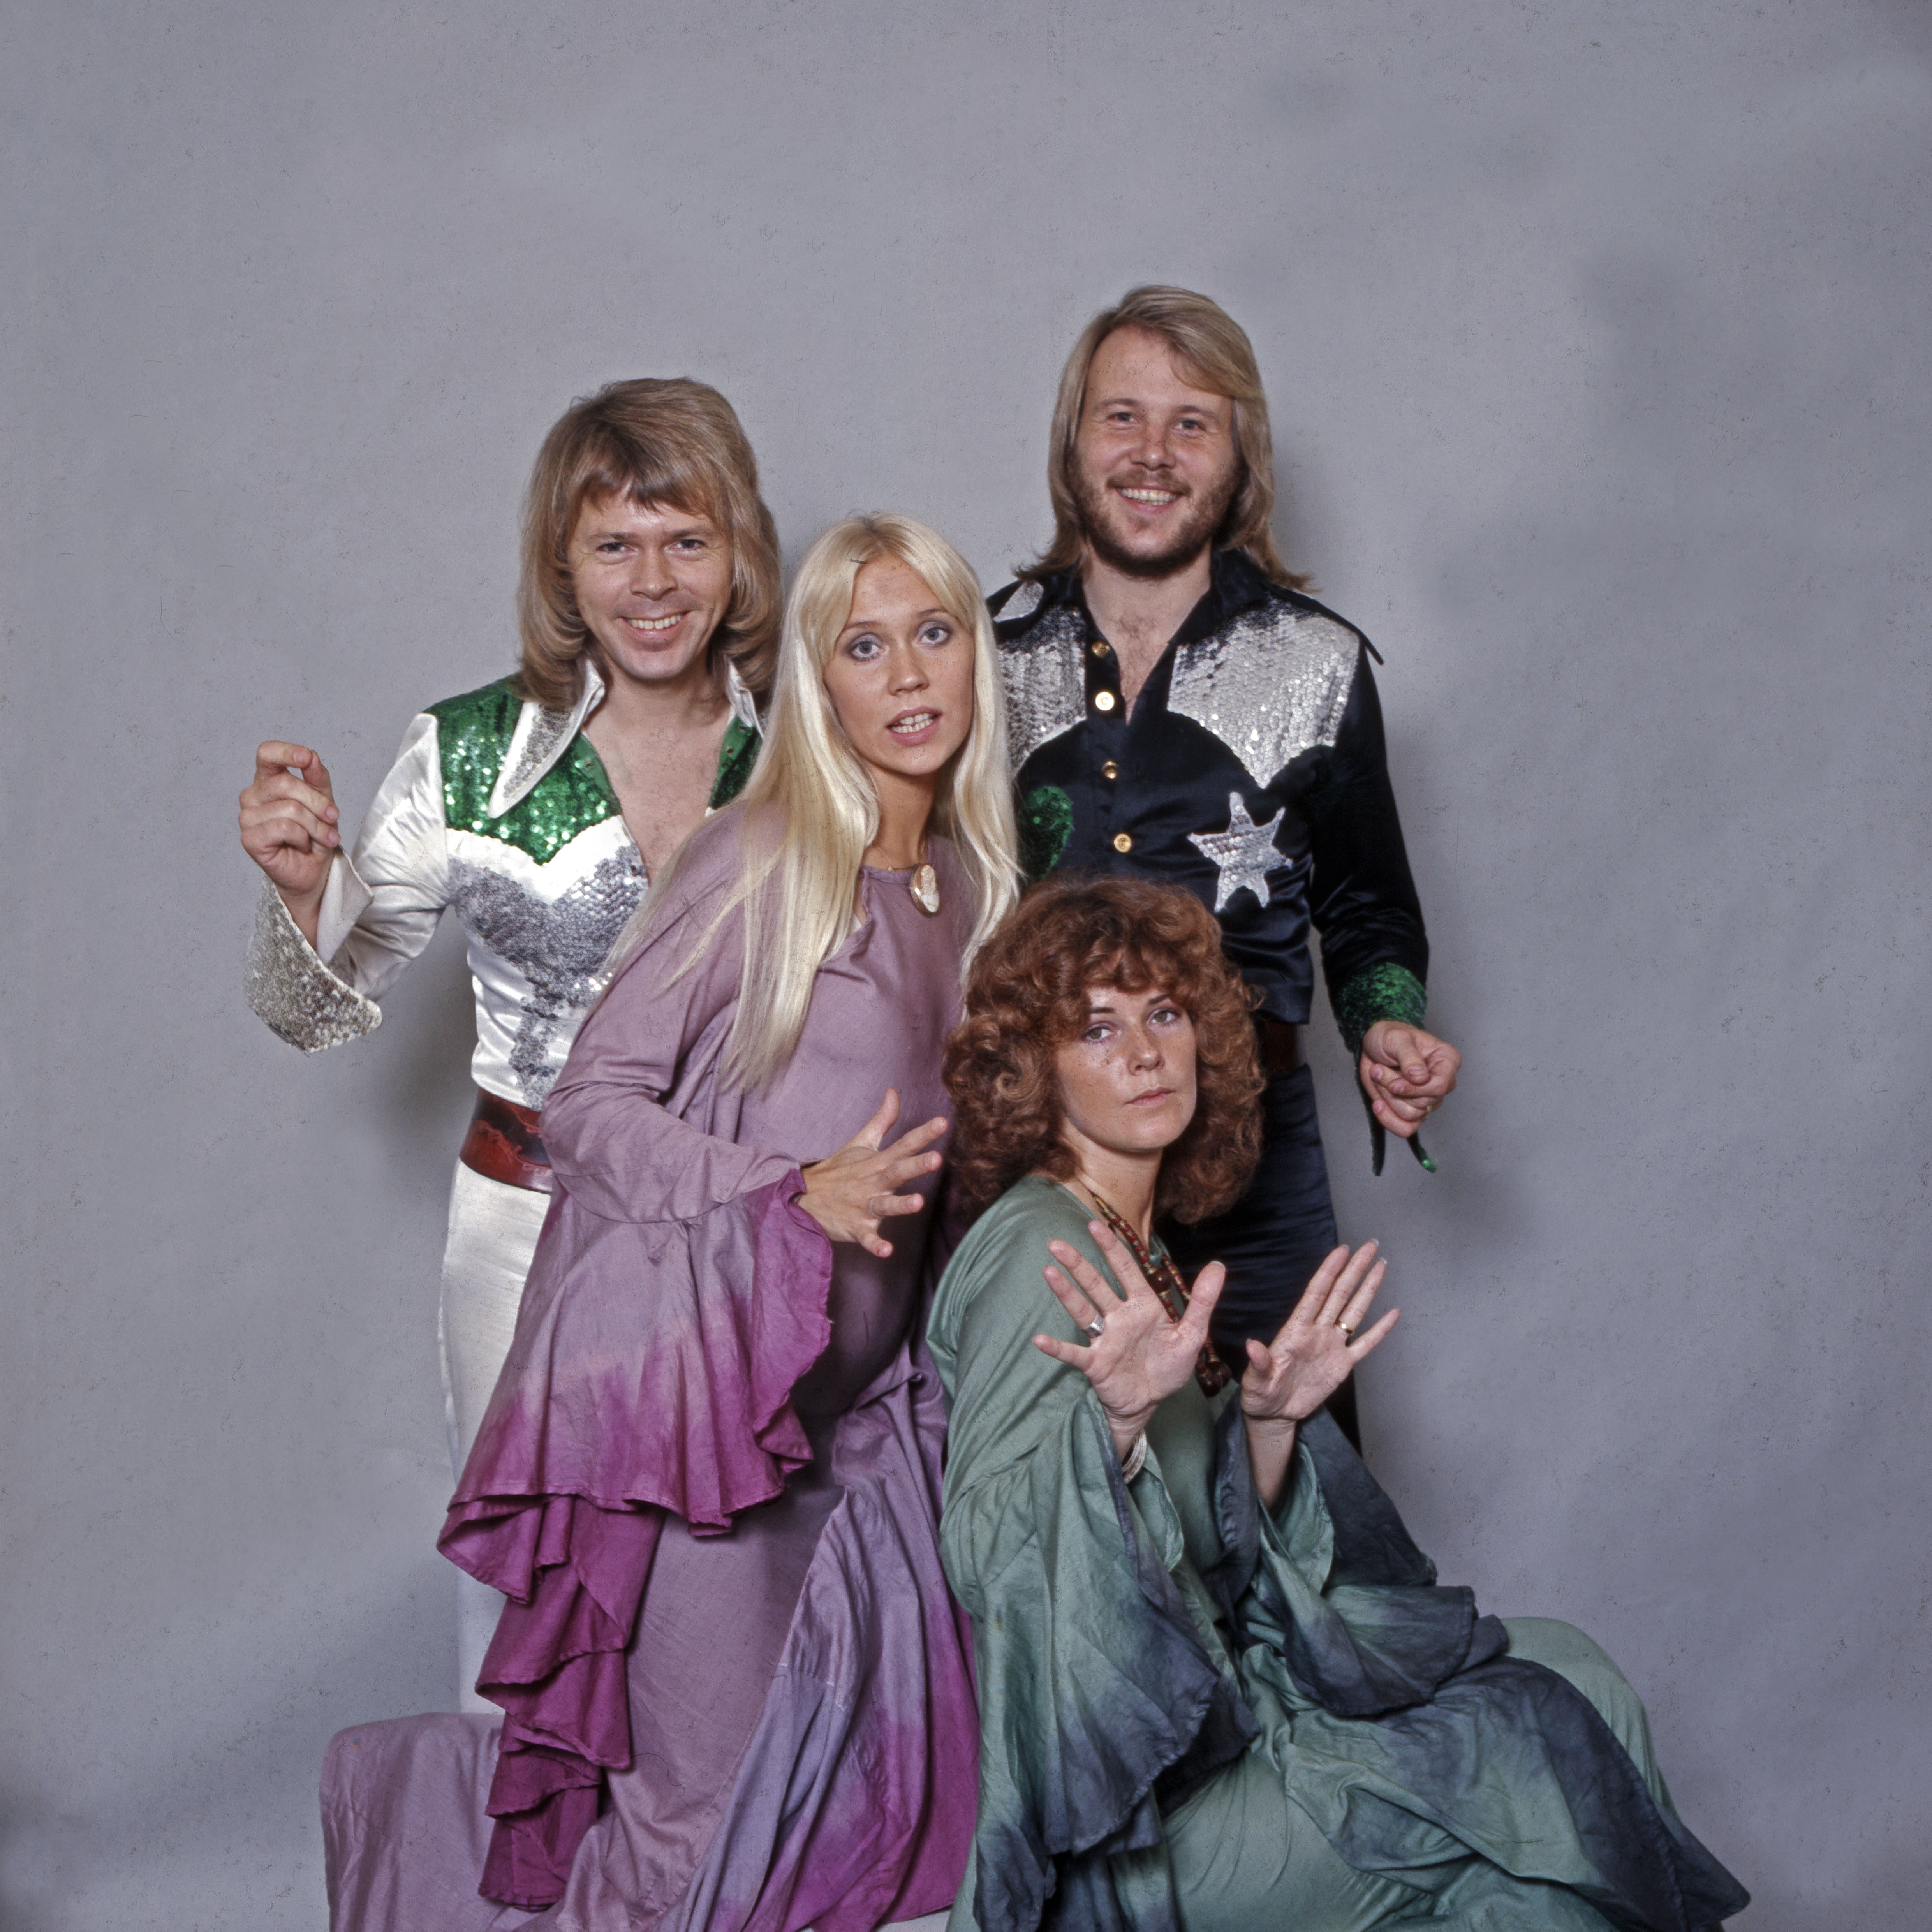 The Swedish pop group ABBA at a studio recording in Germany in the 1970s. | Source: Getty Images